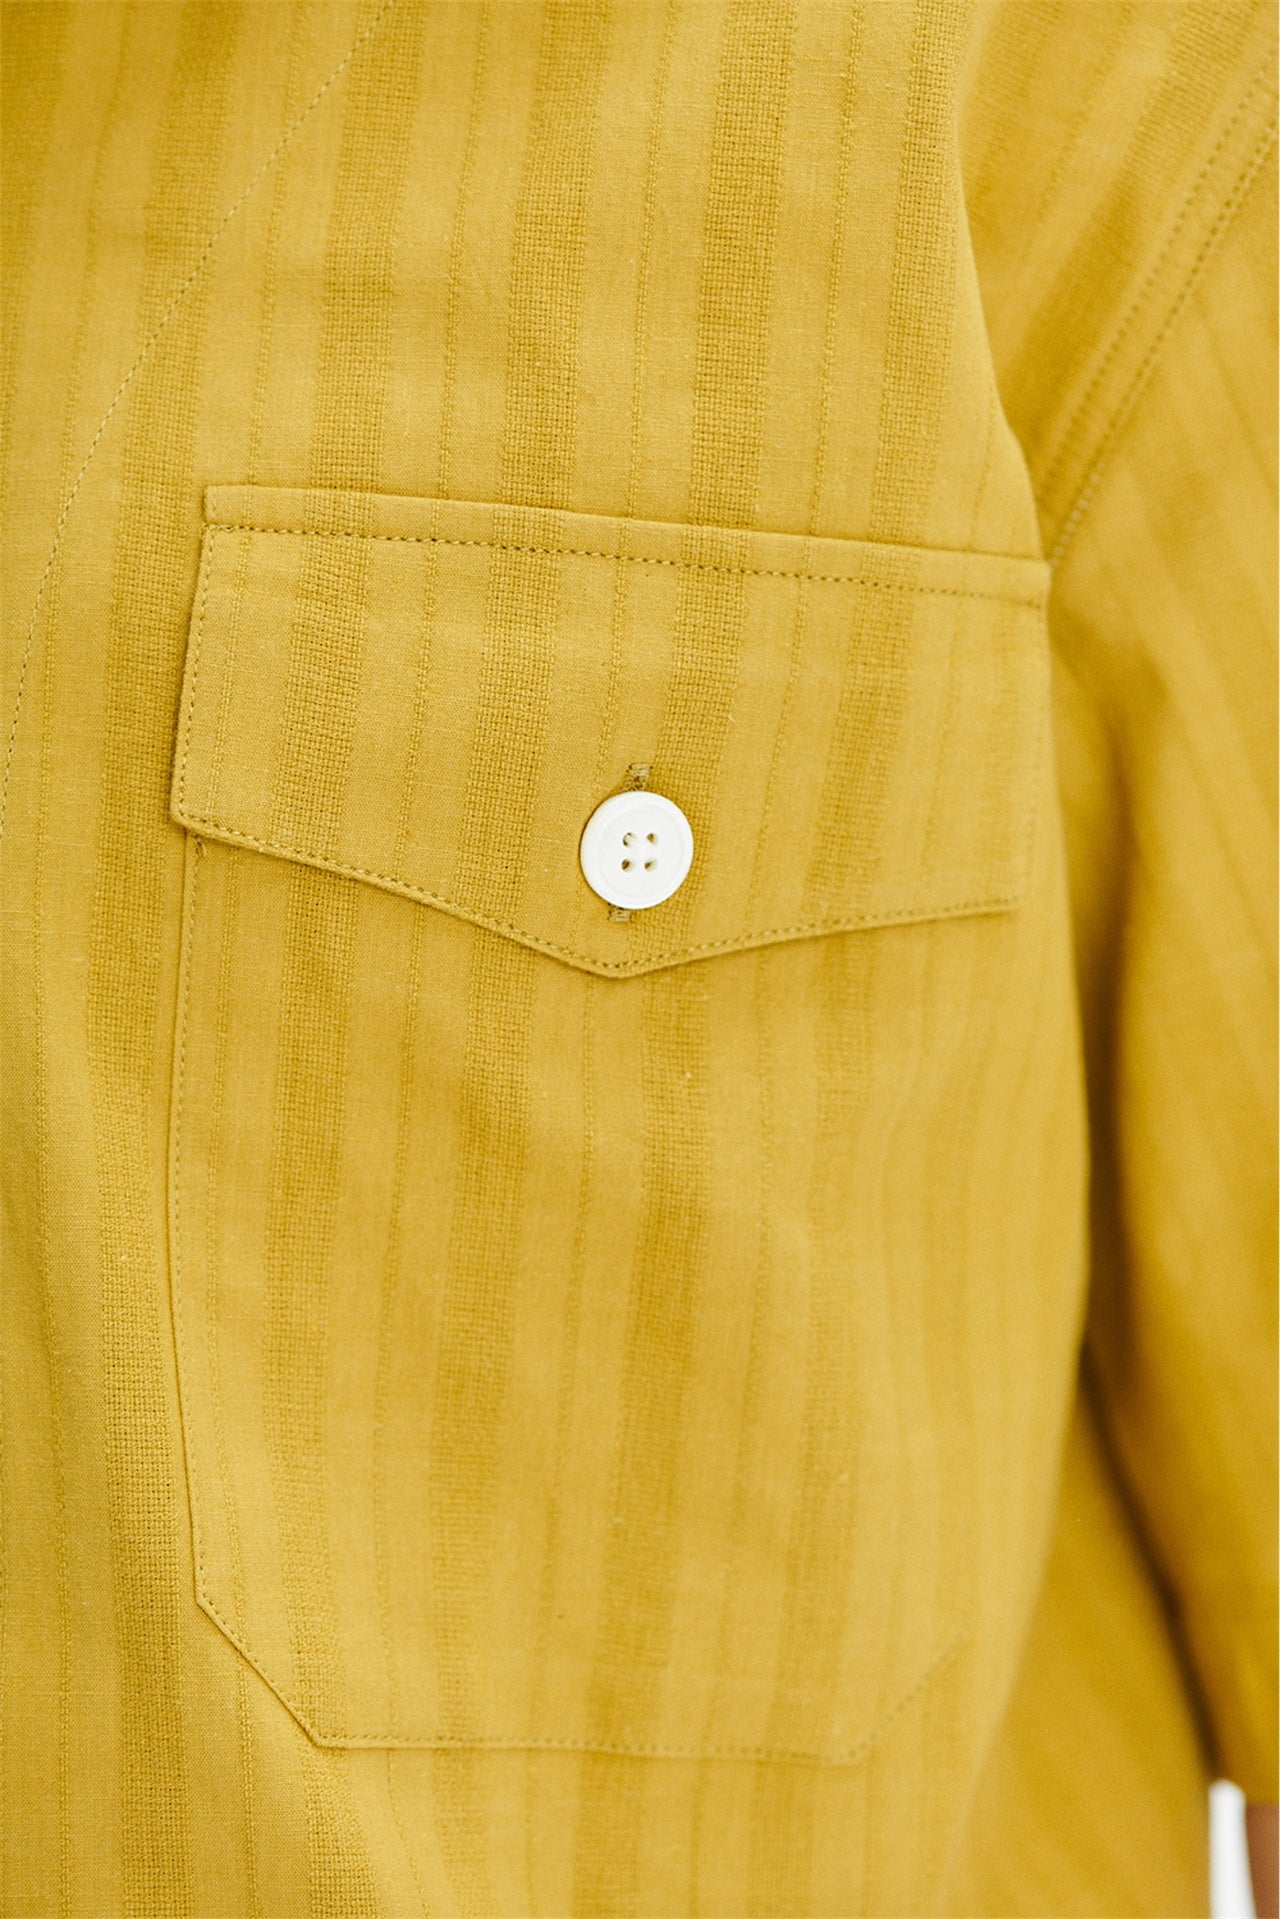 Short Sleeve Tiger Spread Collar Shirt in a Madras Yellow Jacquard Woven Japanese Cotton